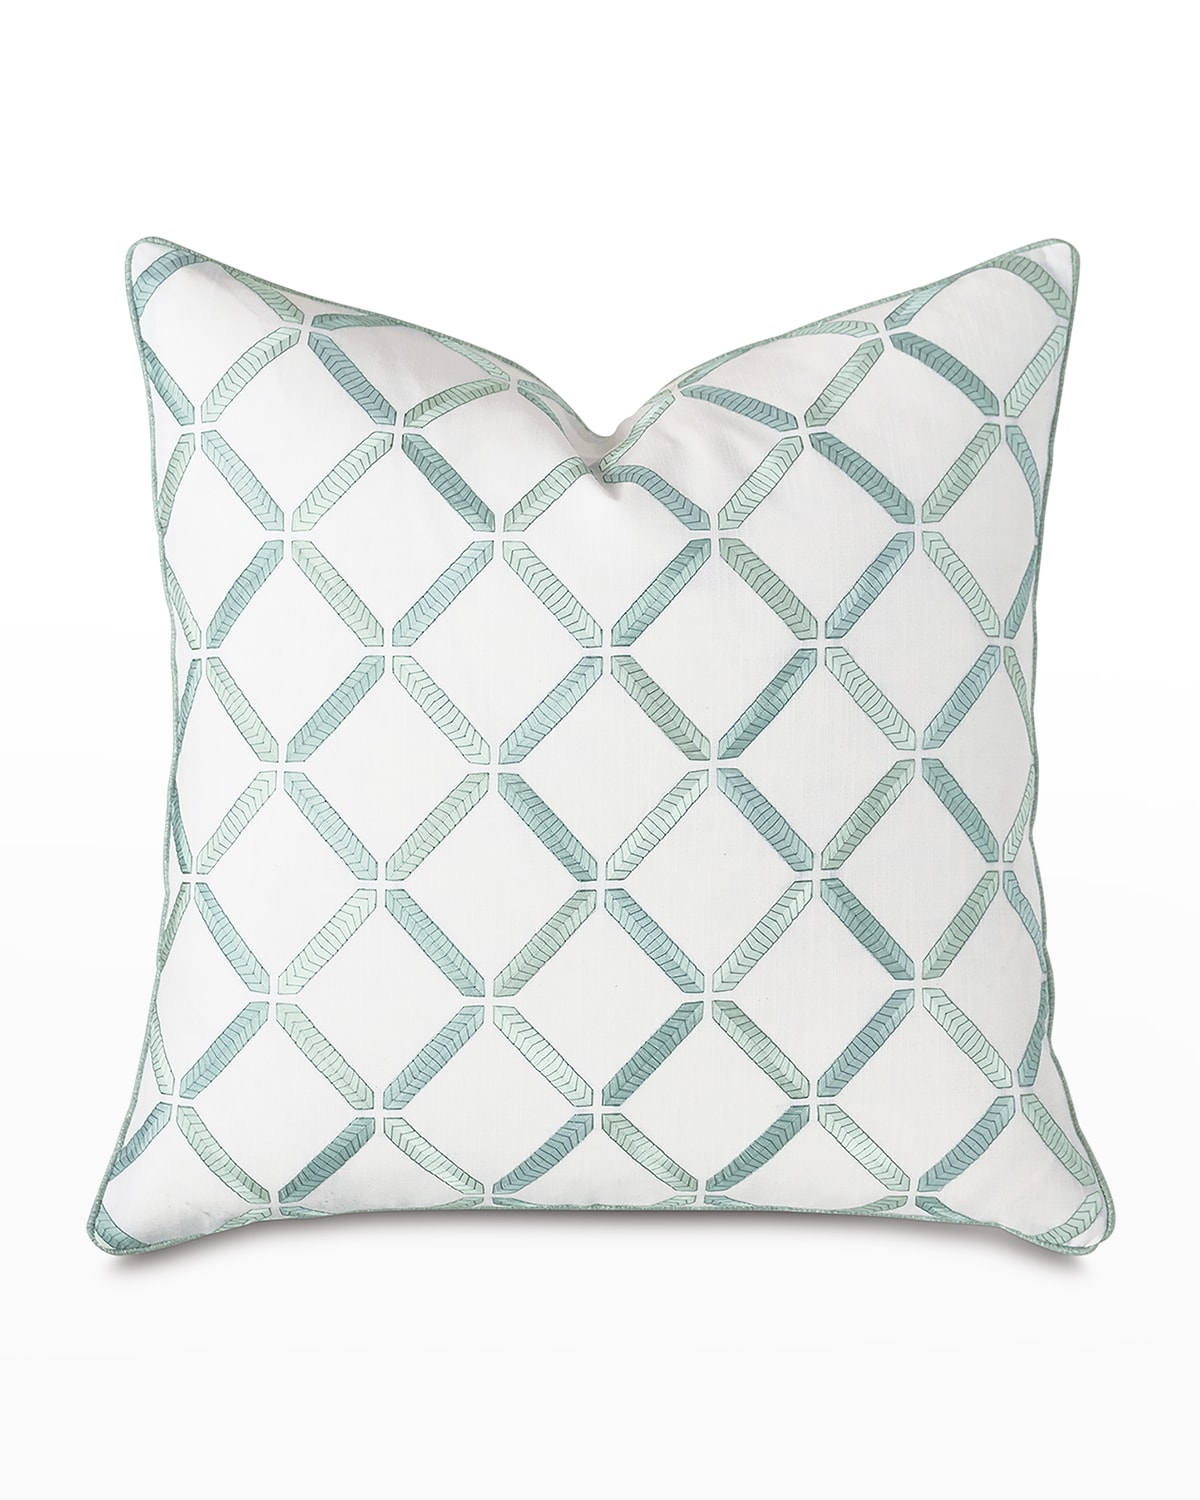 Eastern Accents Brentwood Embroidered 22" Decorative Pillow